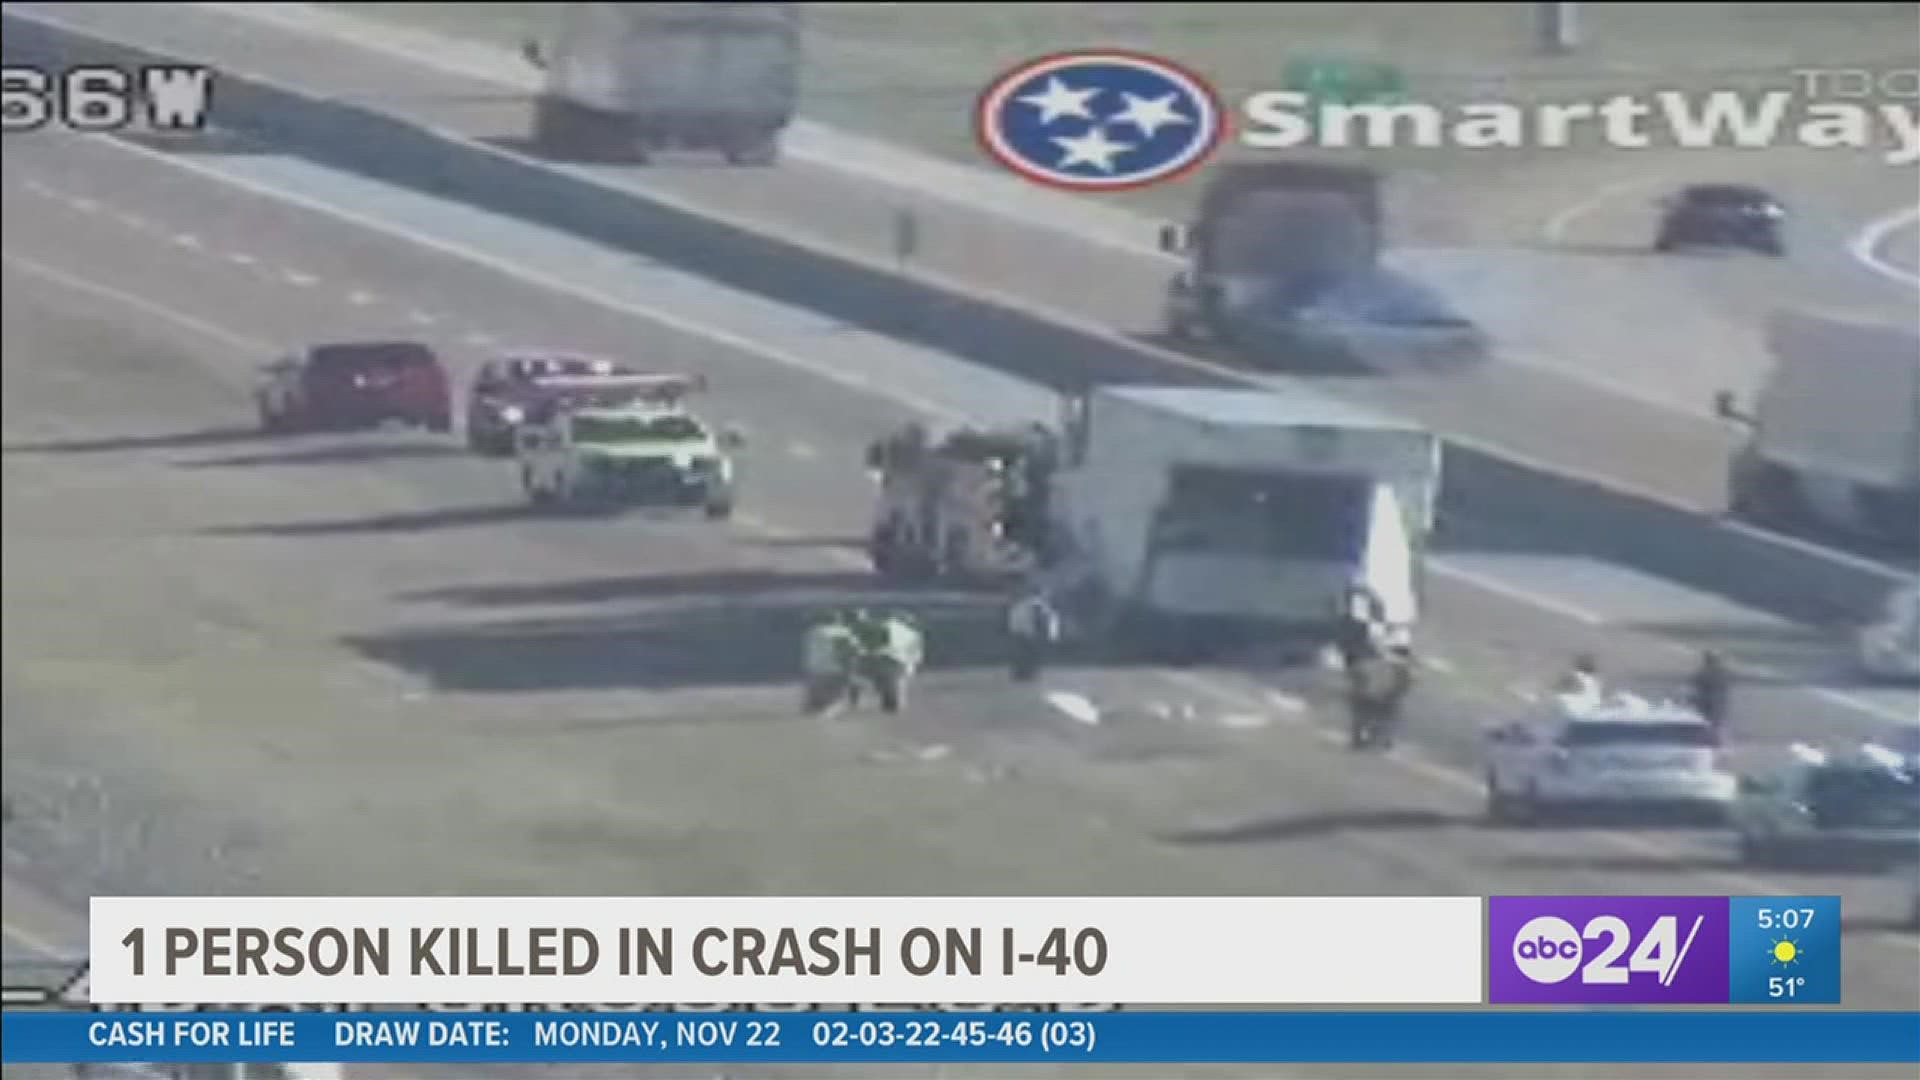 The Tennessee Highway Patrol said one person was killed Tuesday morning in a crash along I-40 in Fayette County.